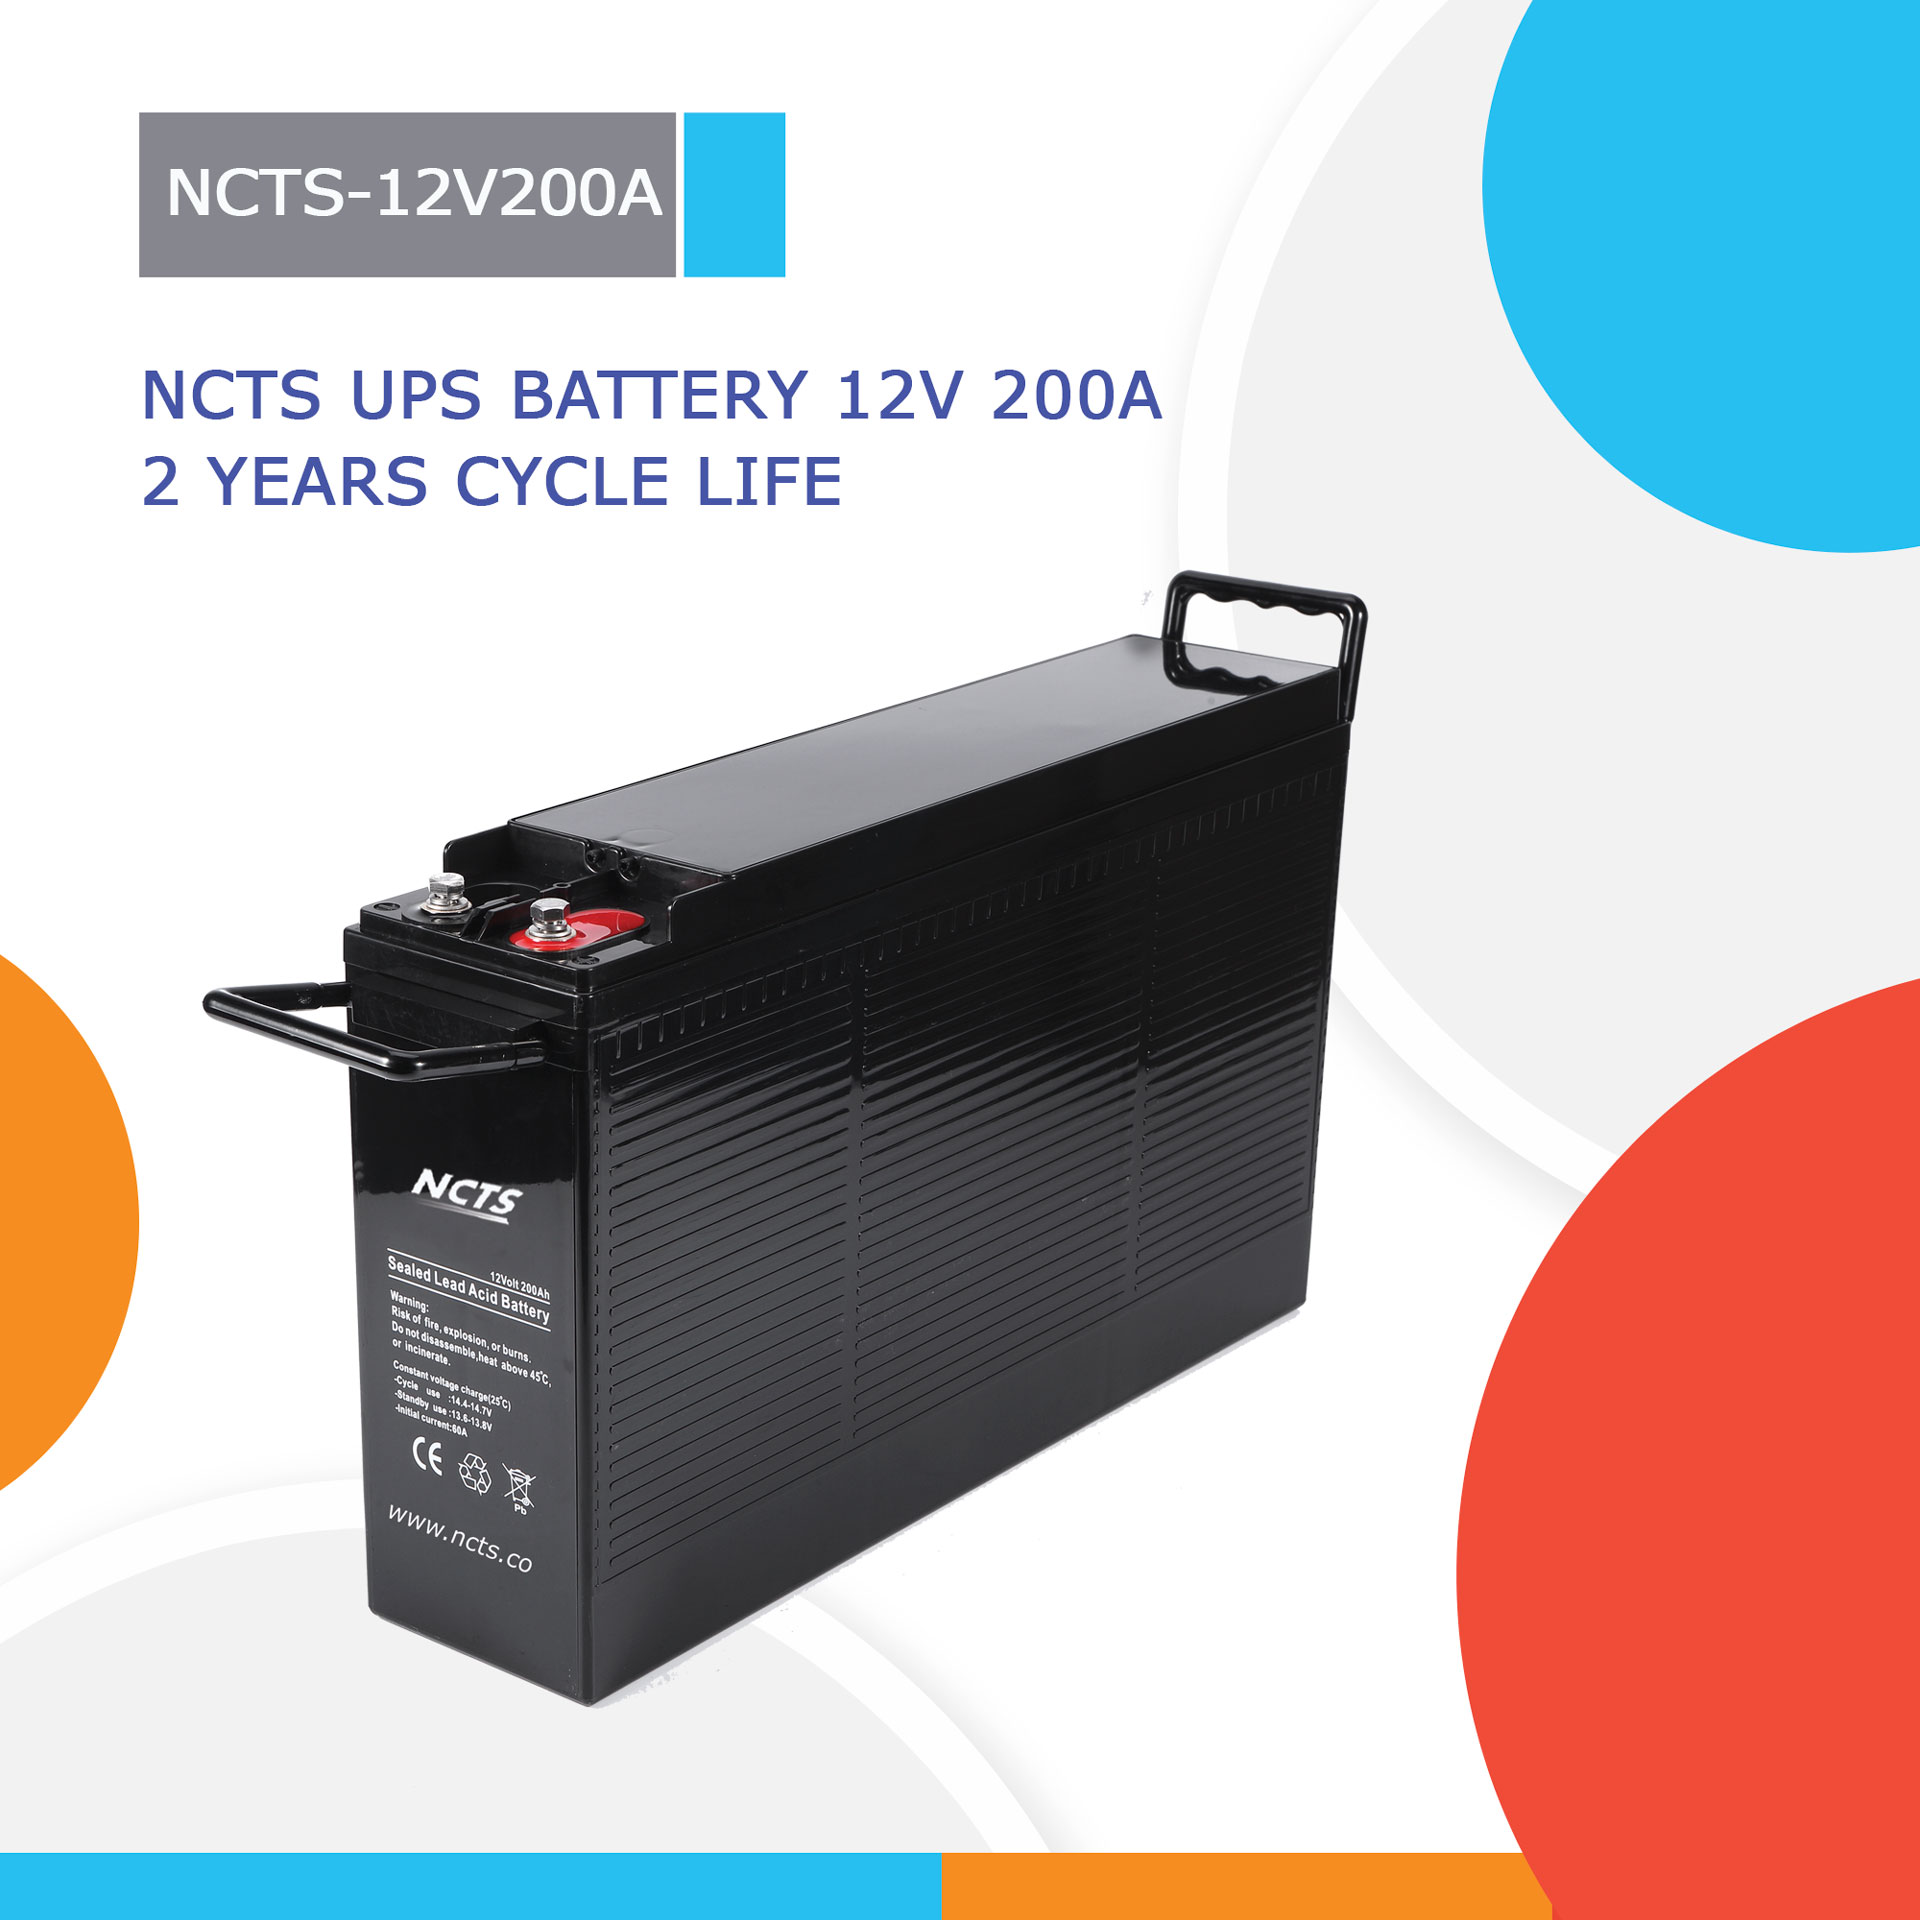 NCTS-12V200A